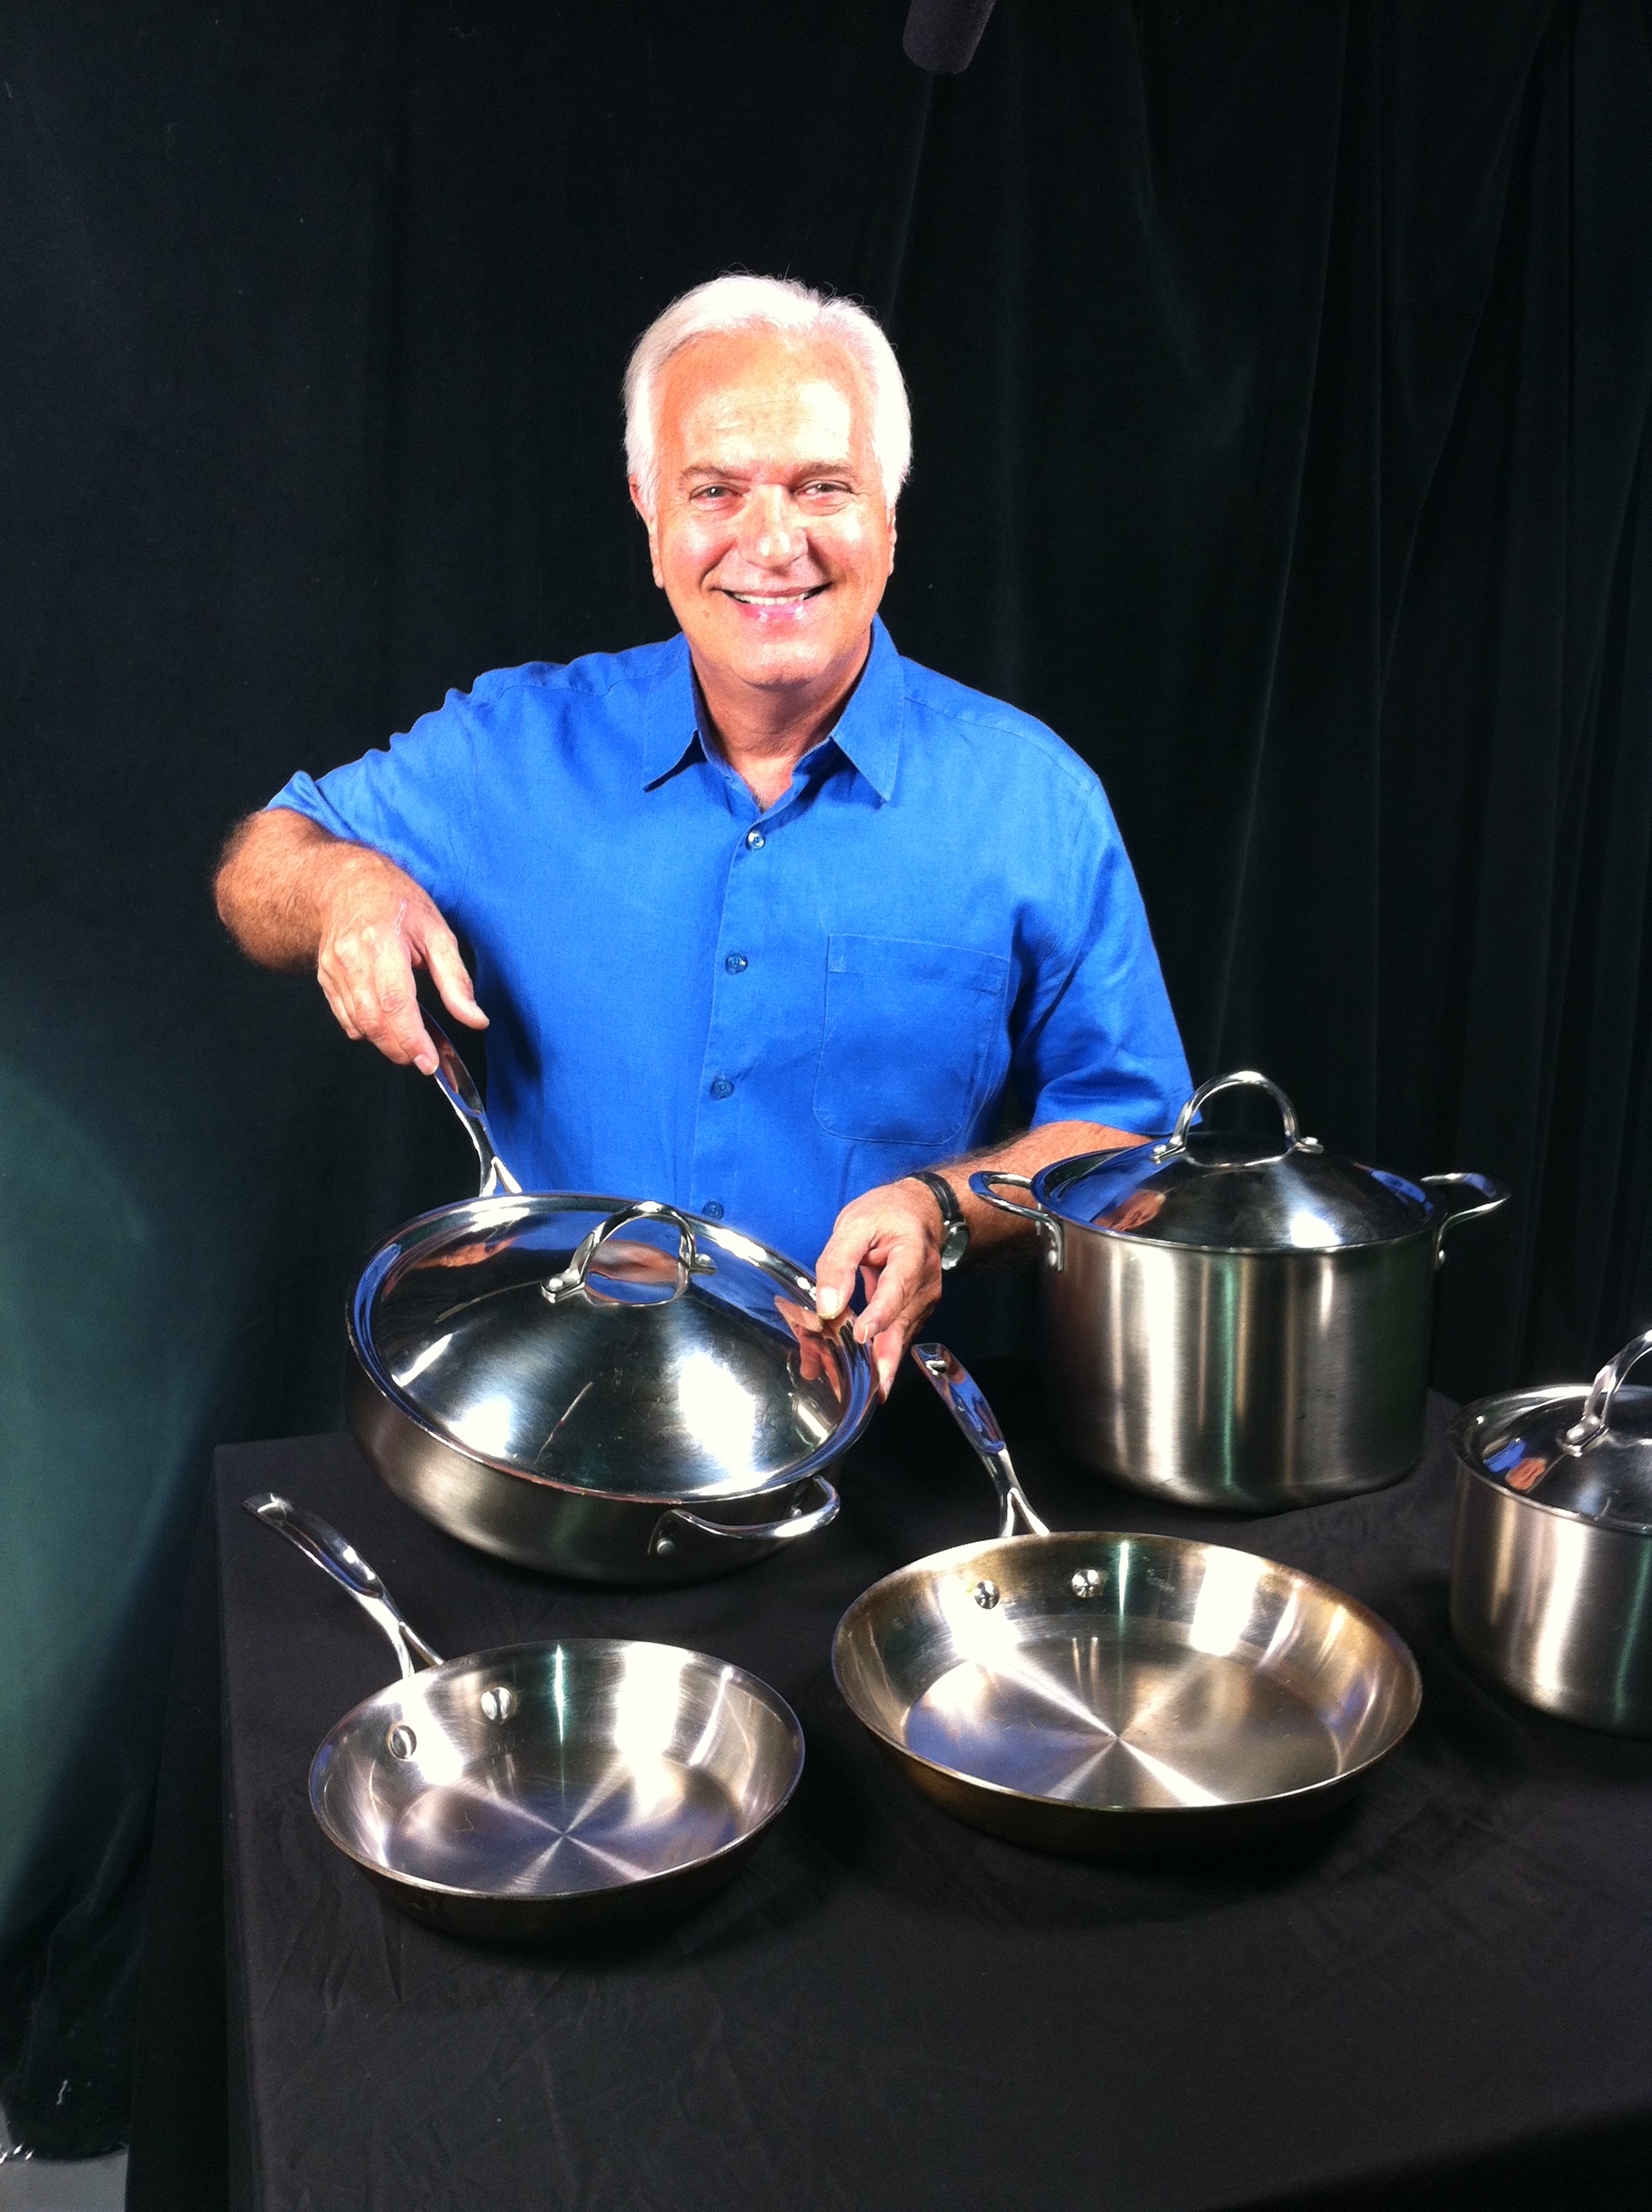 HSN audition video shoot. Can I interest you in some quality cookware?